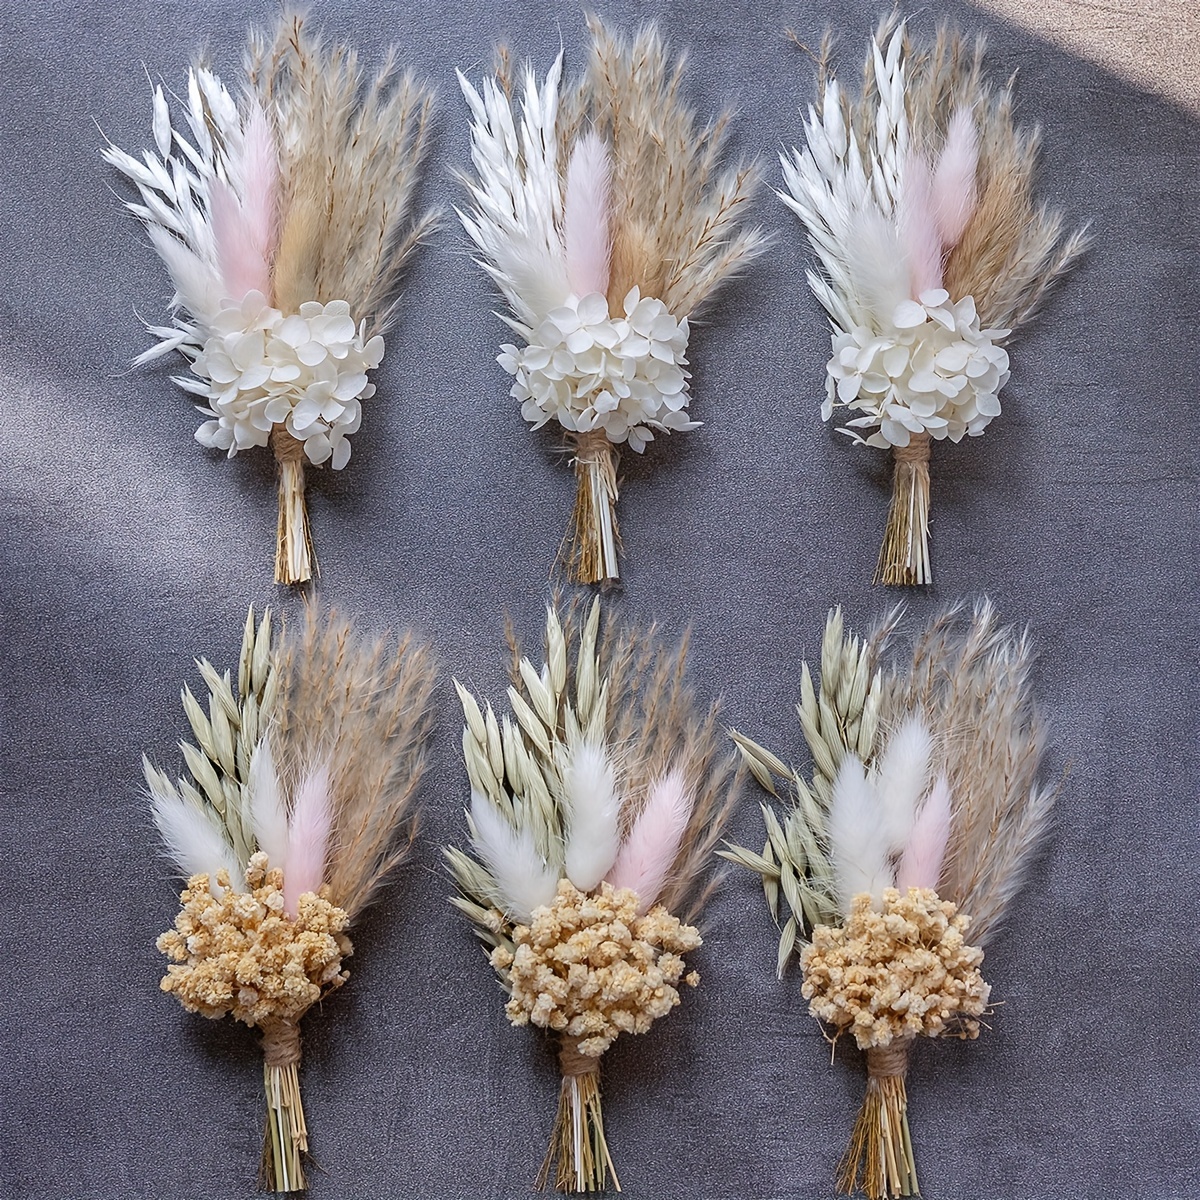 

6pcs Mini Dried Flower Bouquet, For Boho Floral Wedding Table Centerpieces, Bridesmaid Proposal, Birthday Cake Gift, Vases Decoration